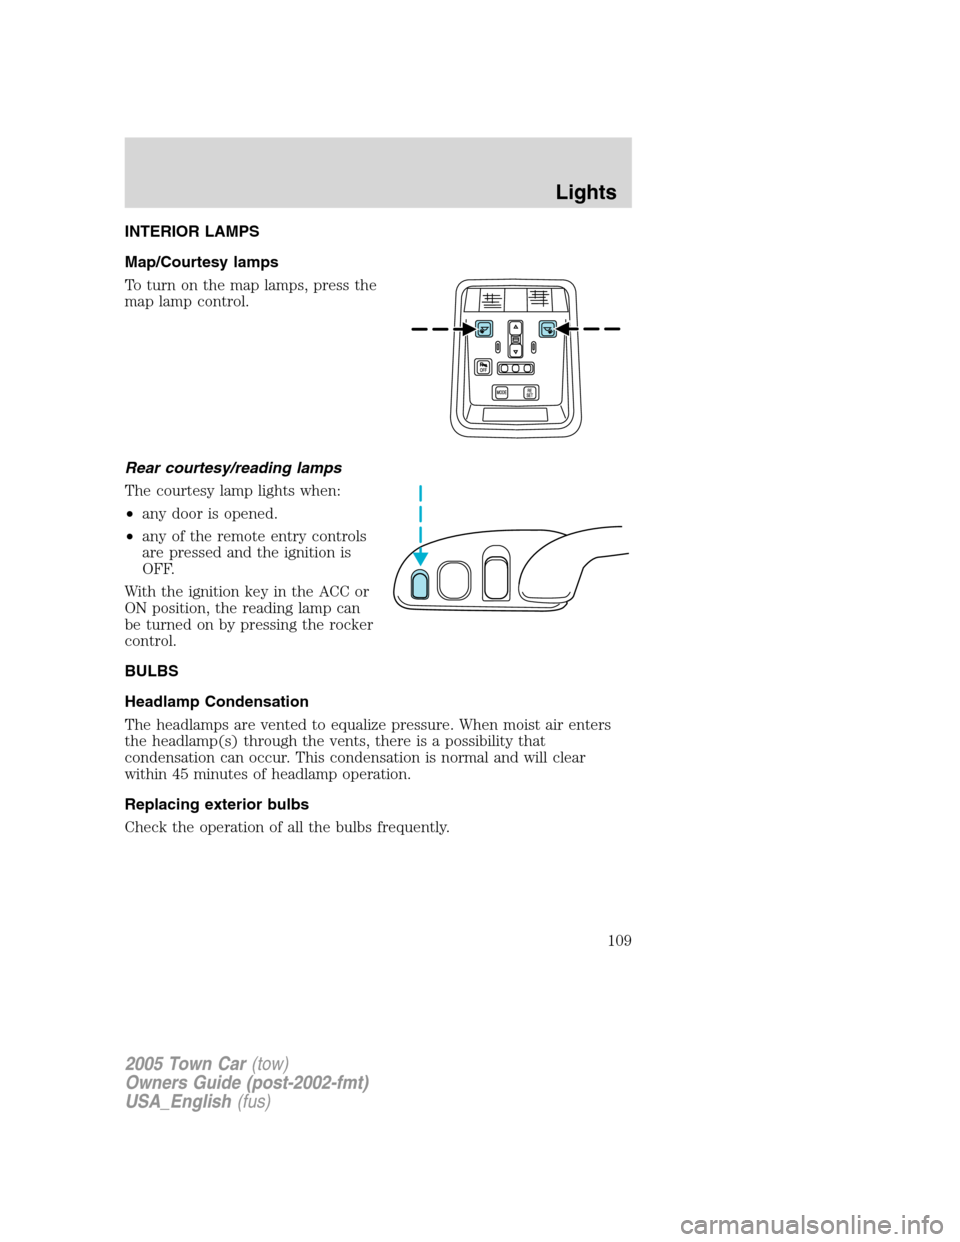 LINCOLN TOWN CAR 2005  Owners Manual INTERIOR LAMPS
Map/Courtesy lamps
To turn on the map lamps, press the
map lamp control.
Rear courtesy/reading lamps
The courtesy lamp lights when:
•any door is opened.
•any of the remote entry con